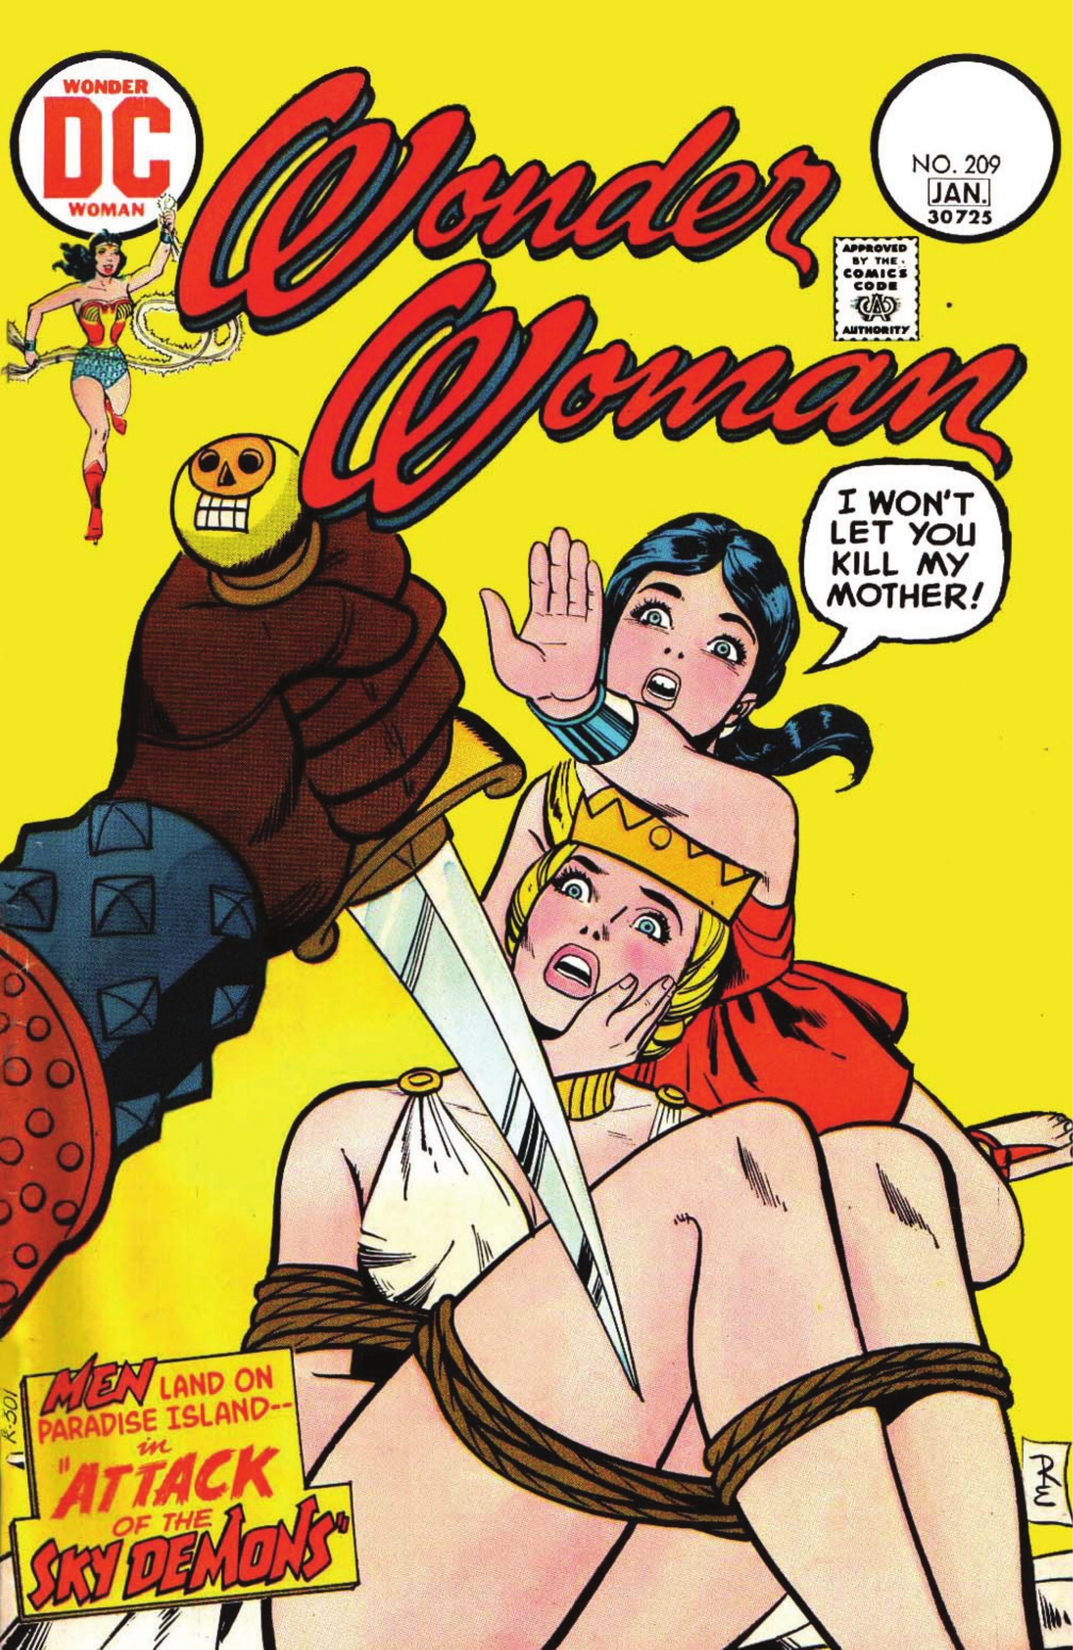 Wonder Woman (1942-1986) #209 preview images